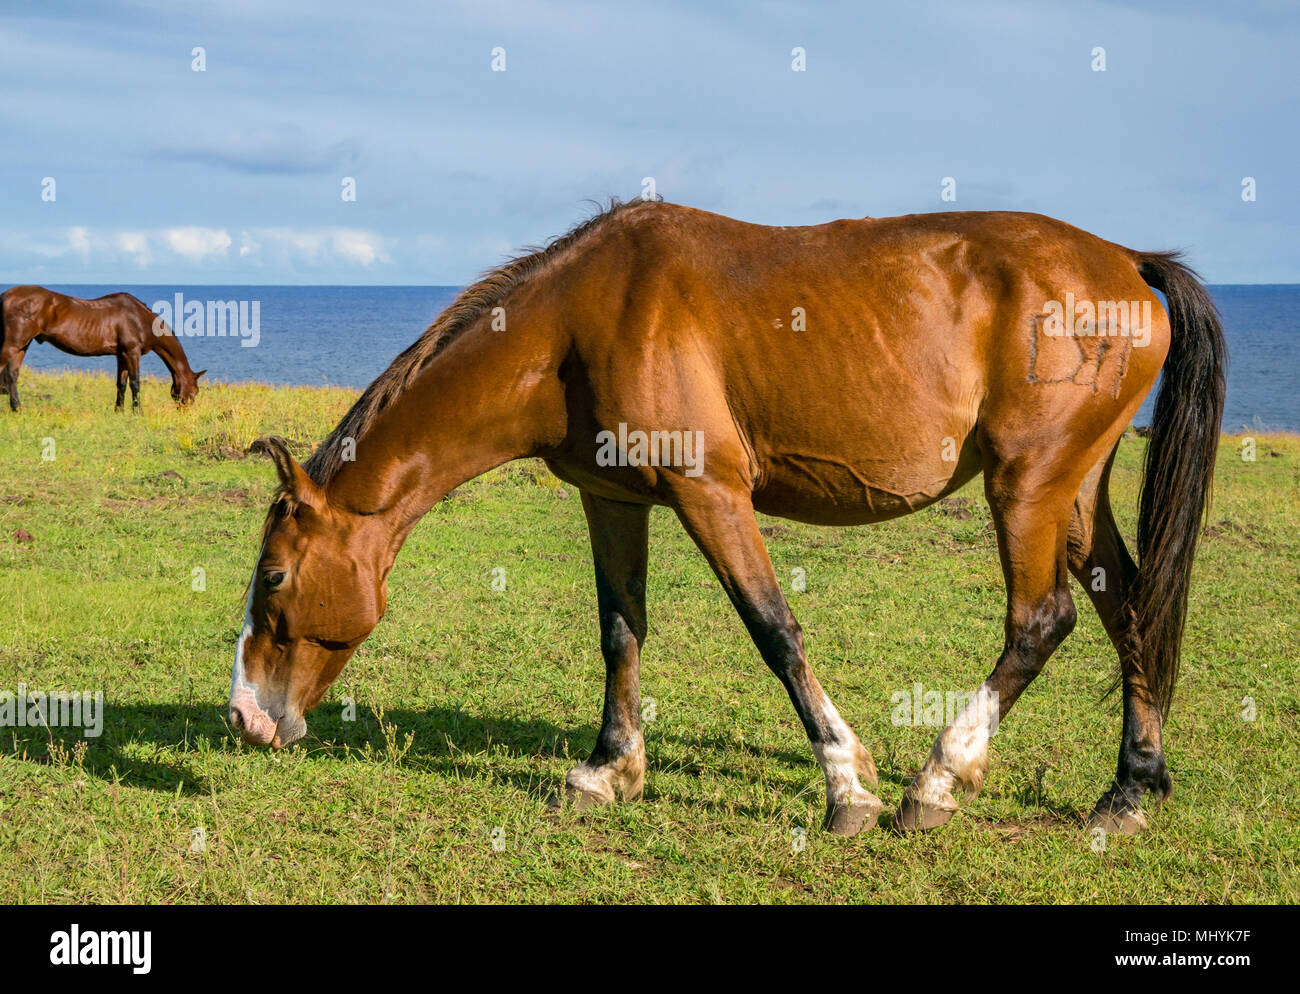 Horses grazing on grass next to the sea, with blue sky, Easter Island, Chile Stock Photo